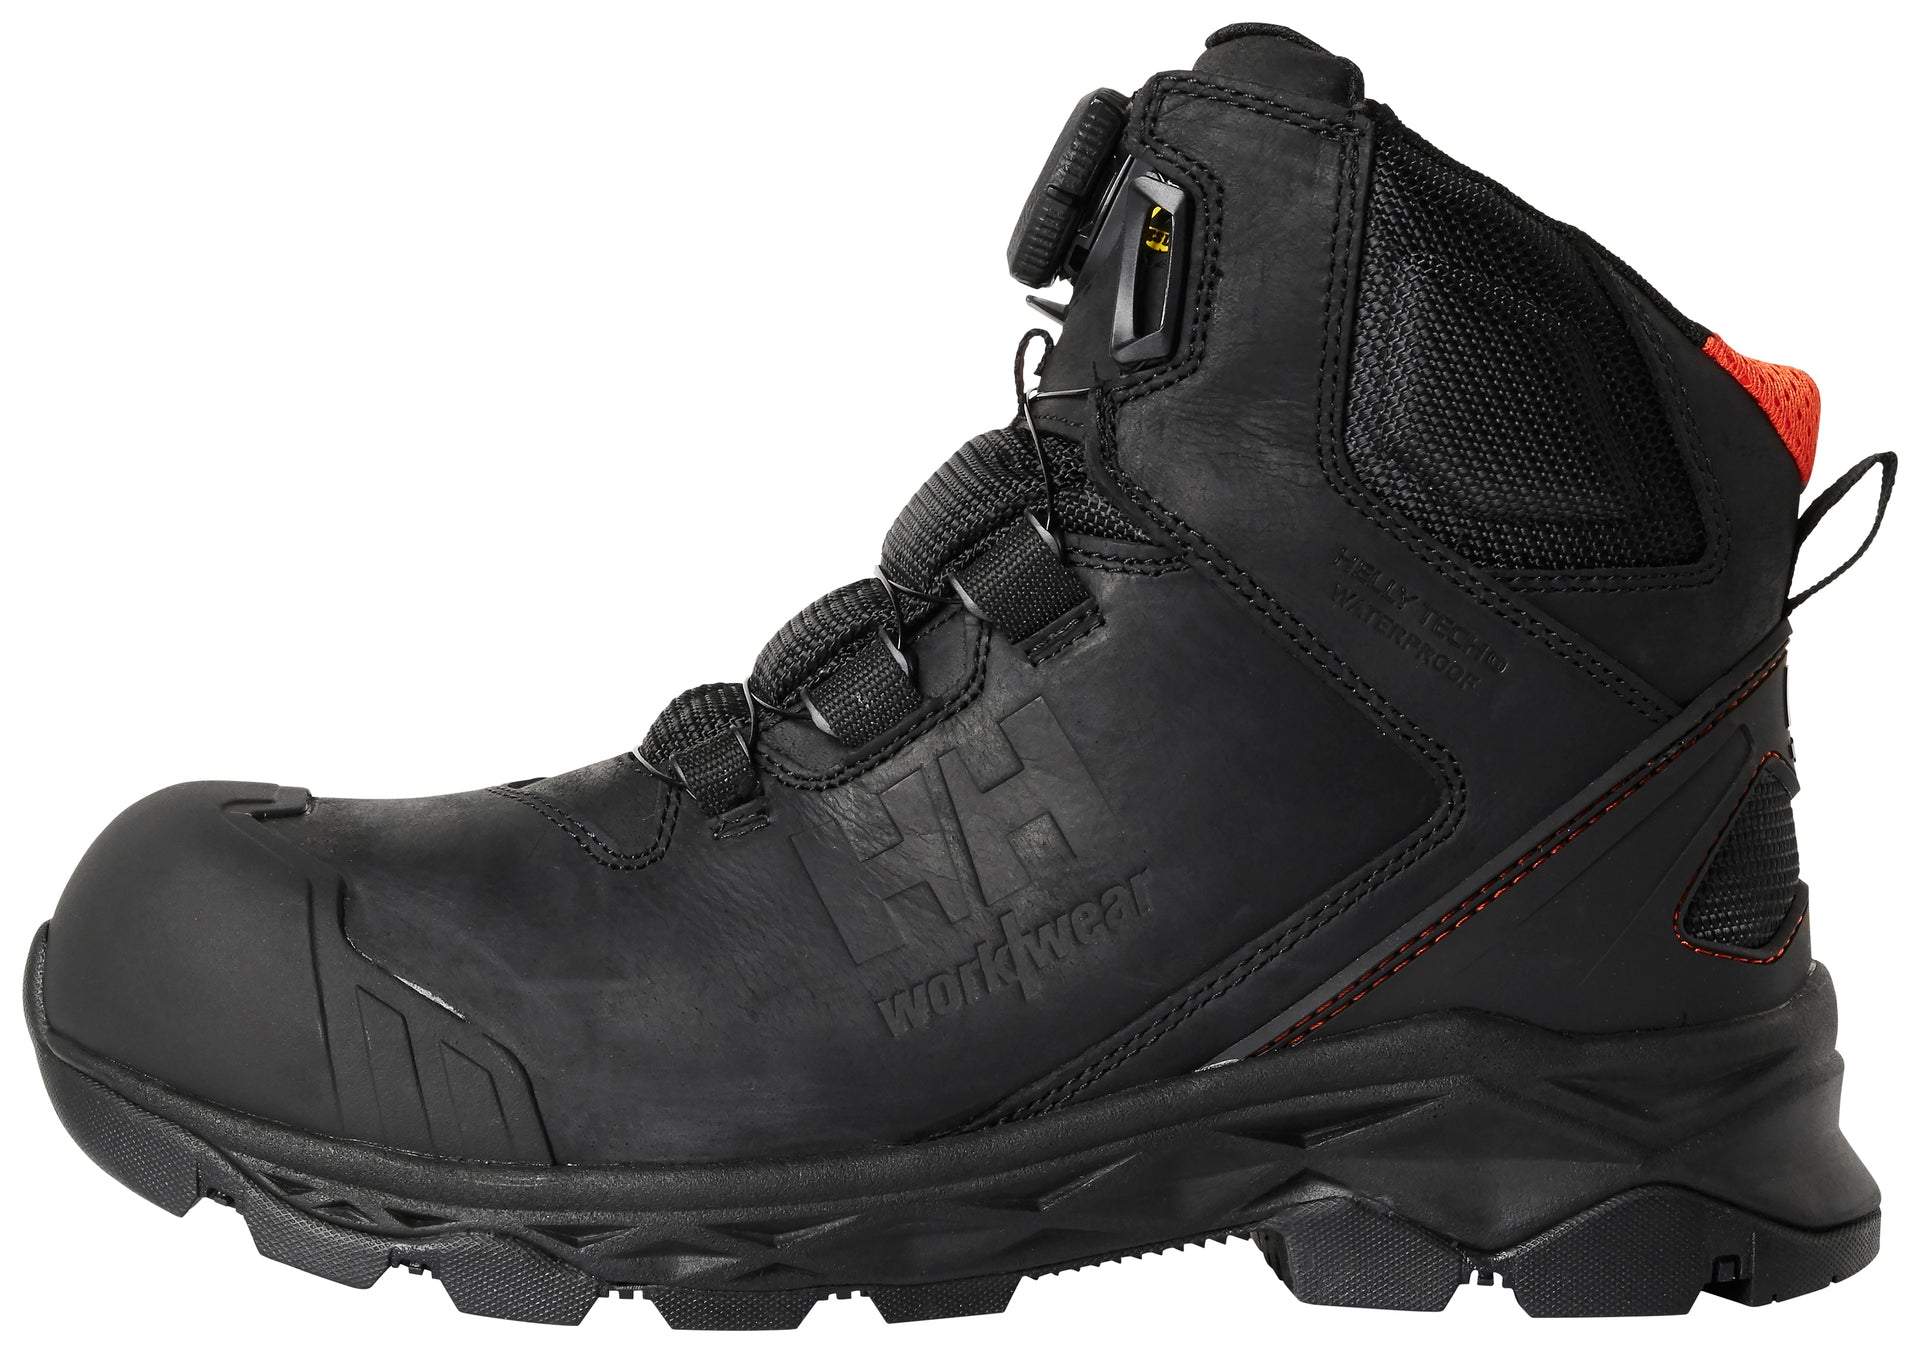 Helly Hansen Oxford Mid Boa S3 Ht Safety Boots - Black